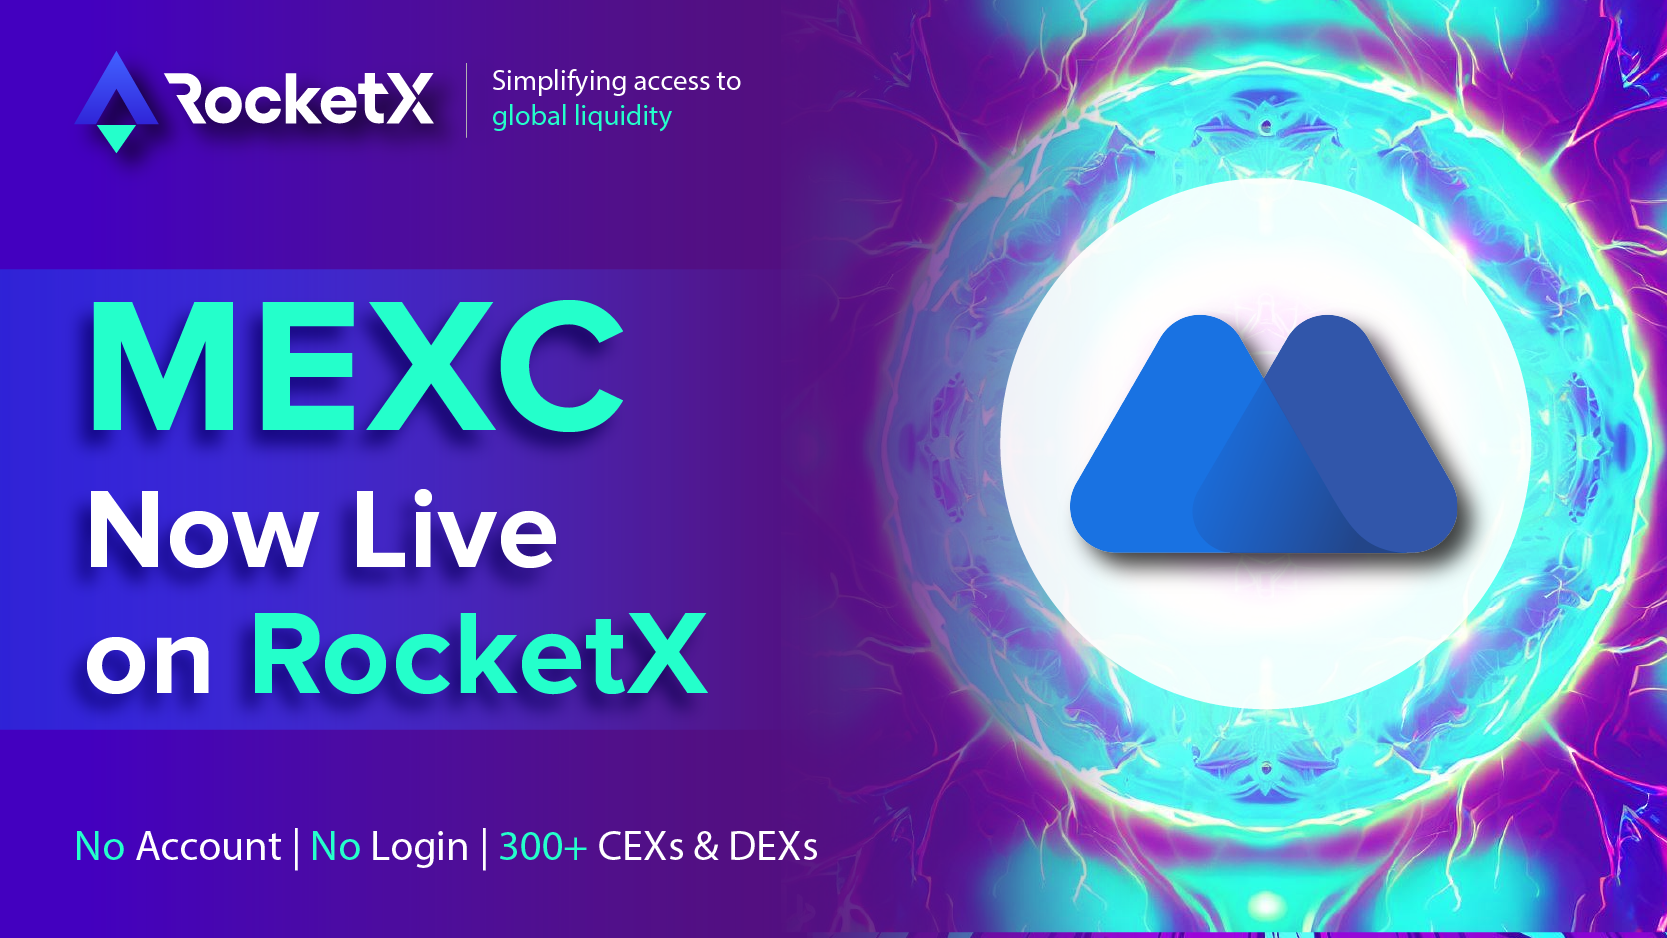 RocketX Integrates MEXC: A Game-Changer for Cryptocurrency Trading Liquidity